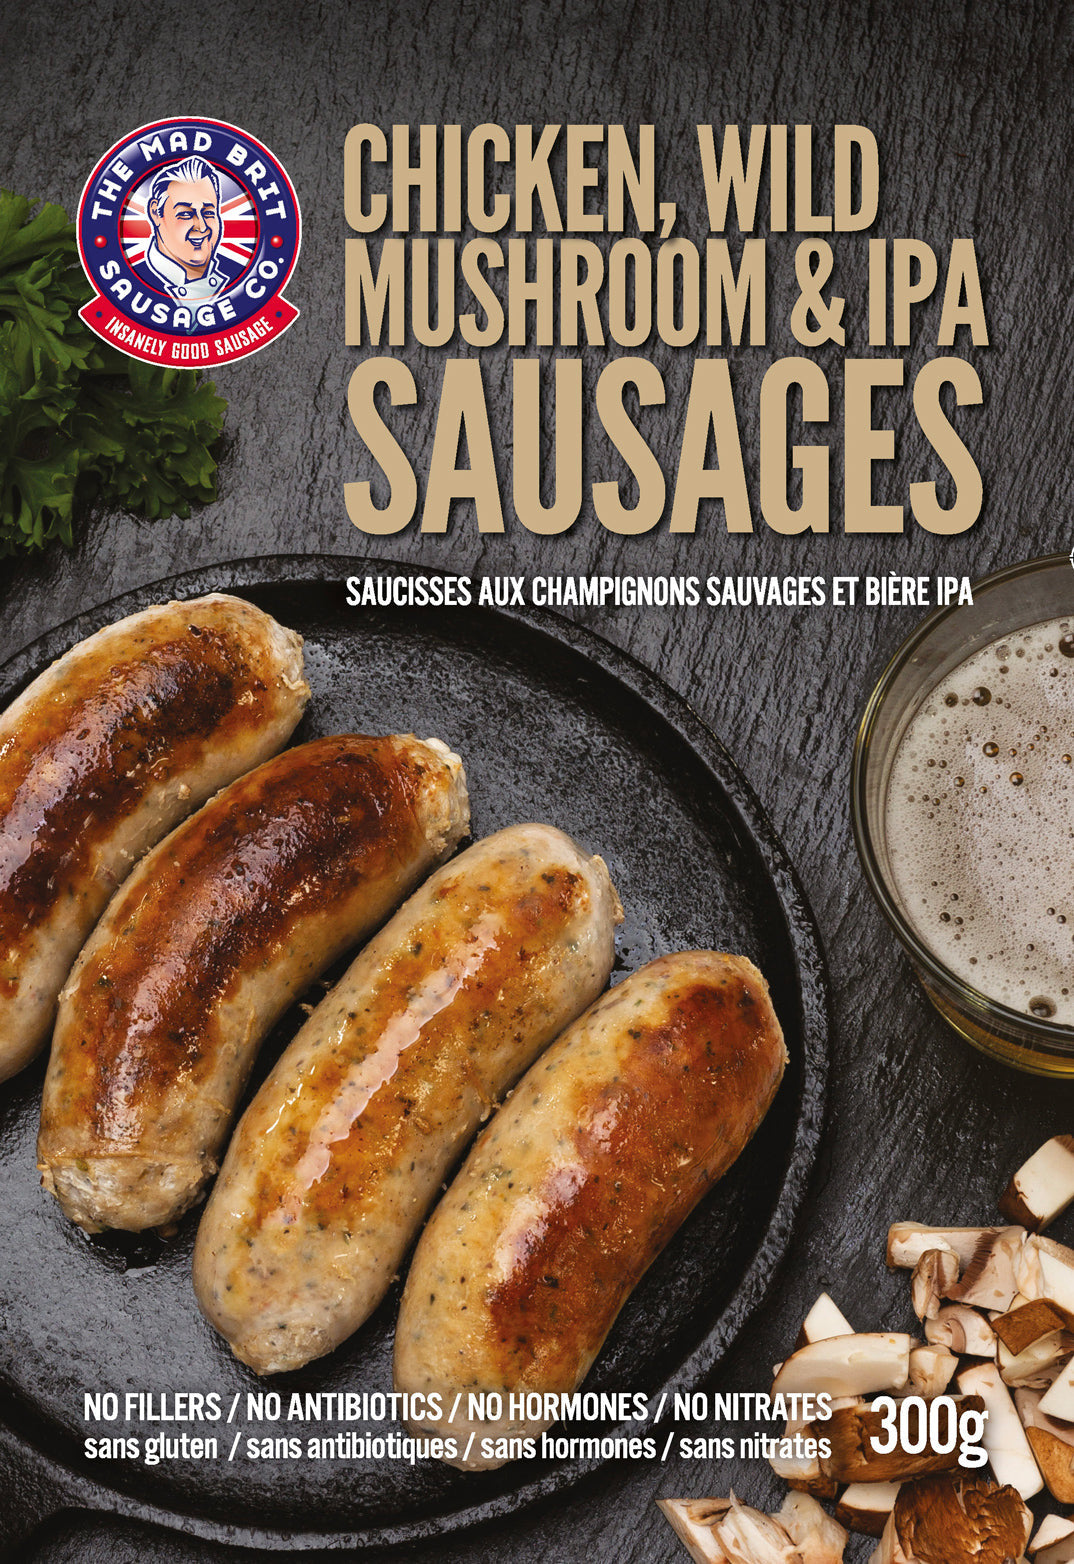 Mad Brit Sausage Co. - MULTIPACK SPECIAL